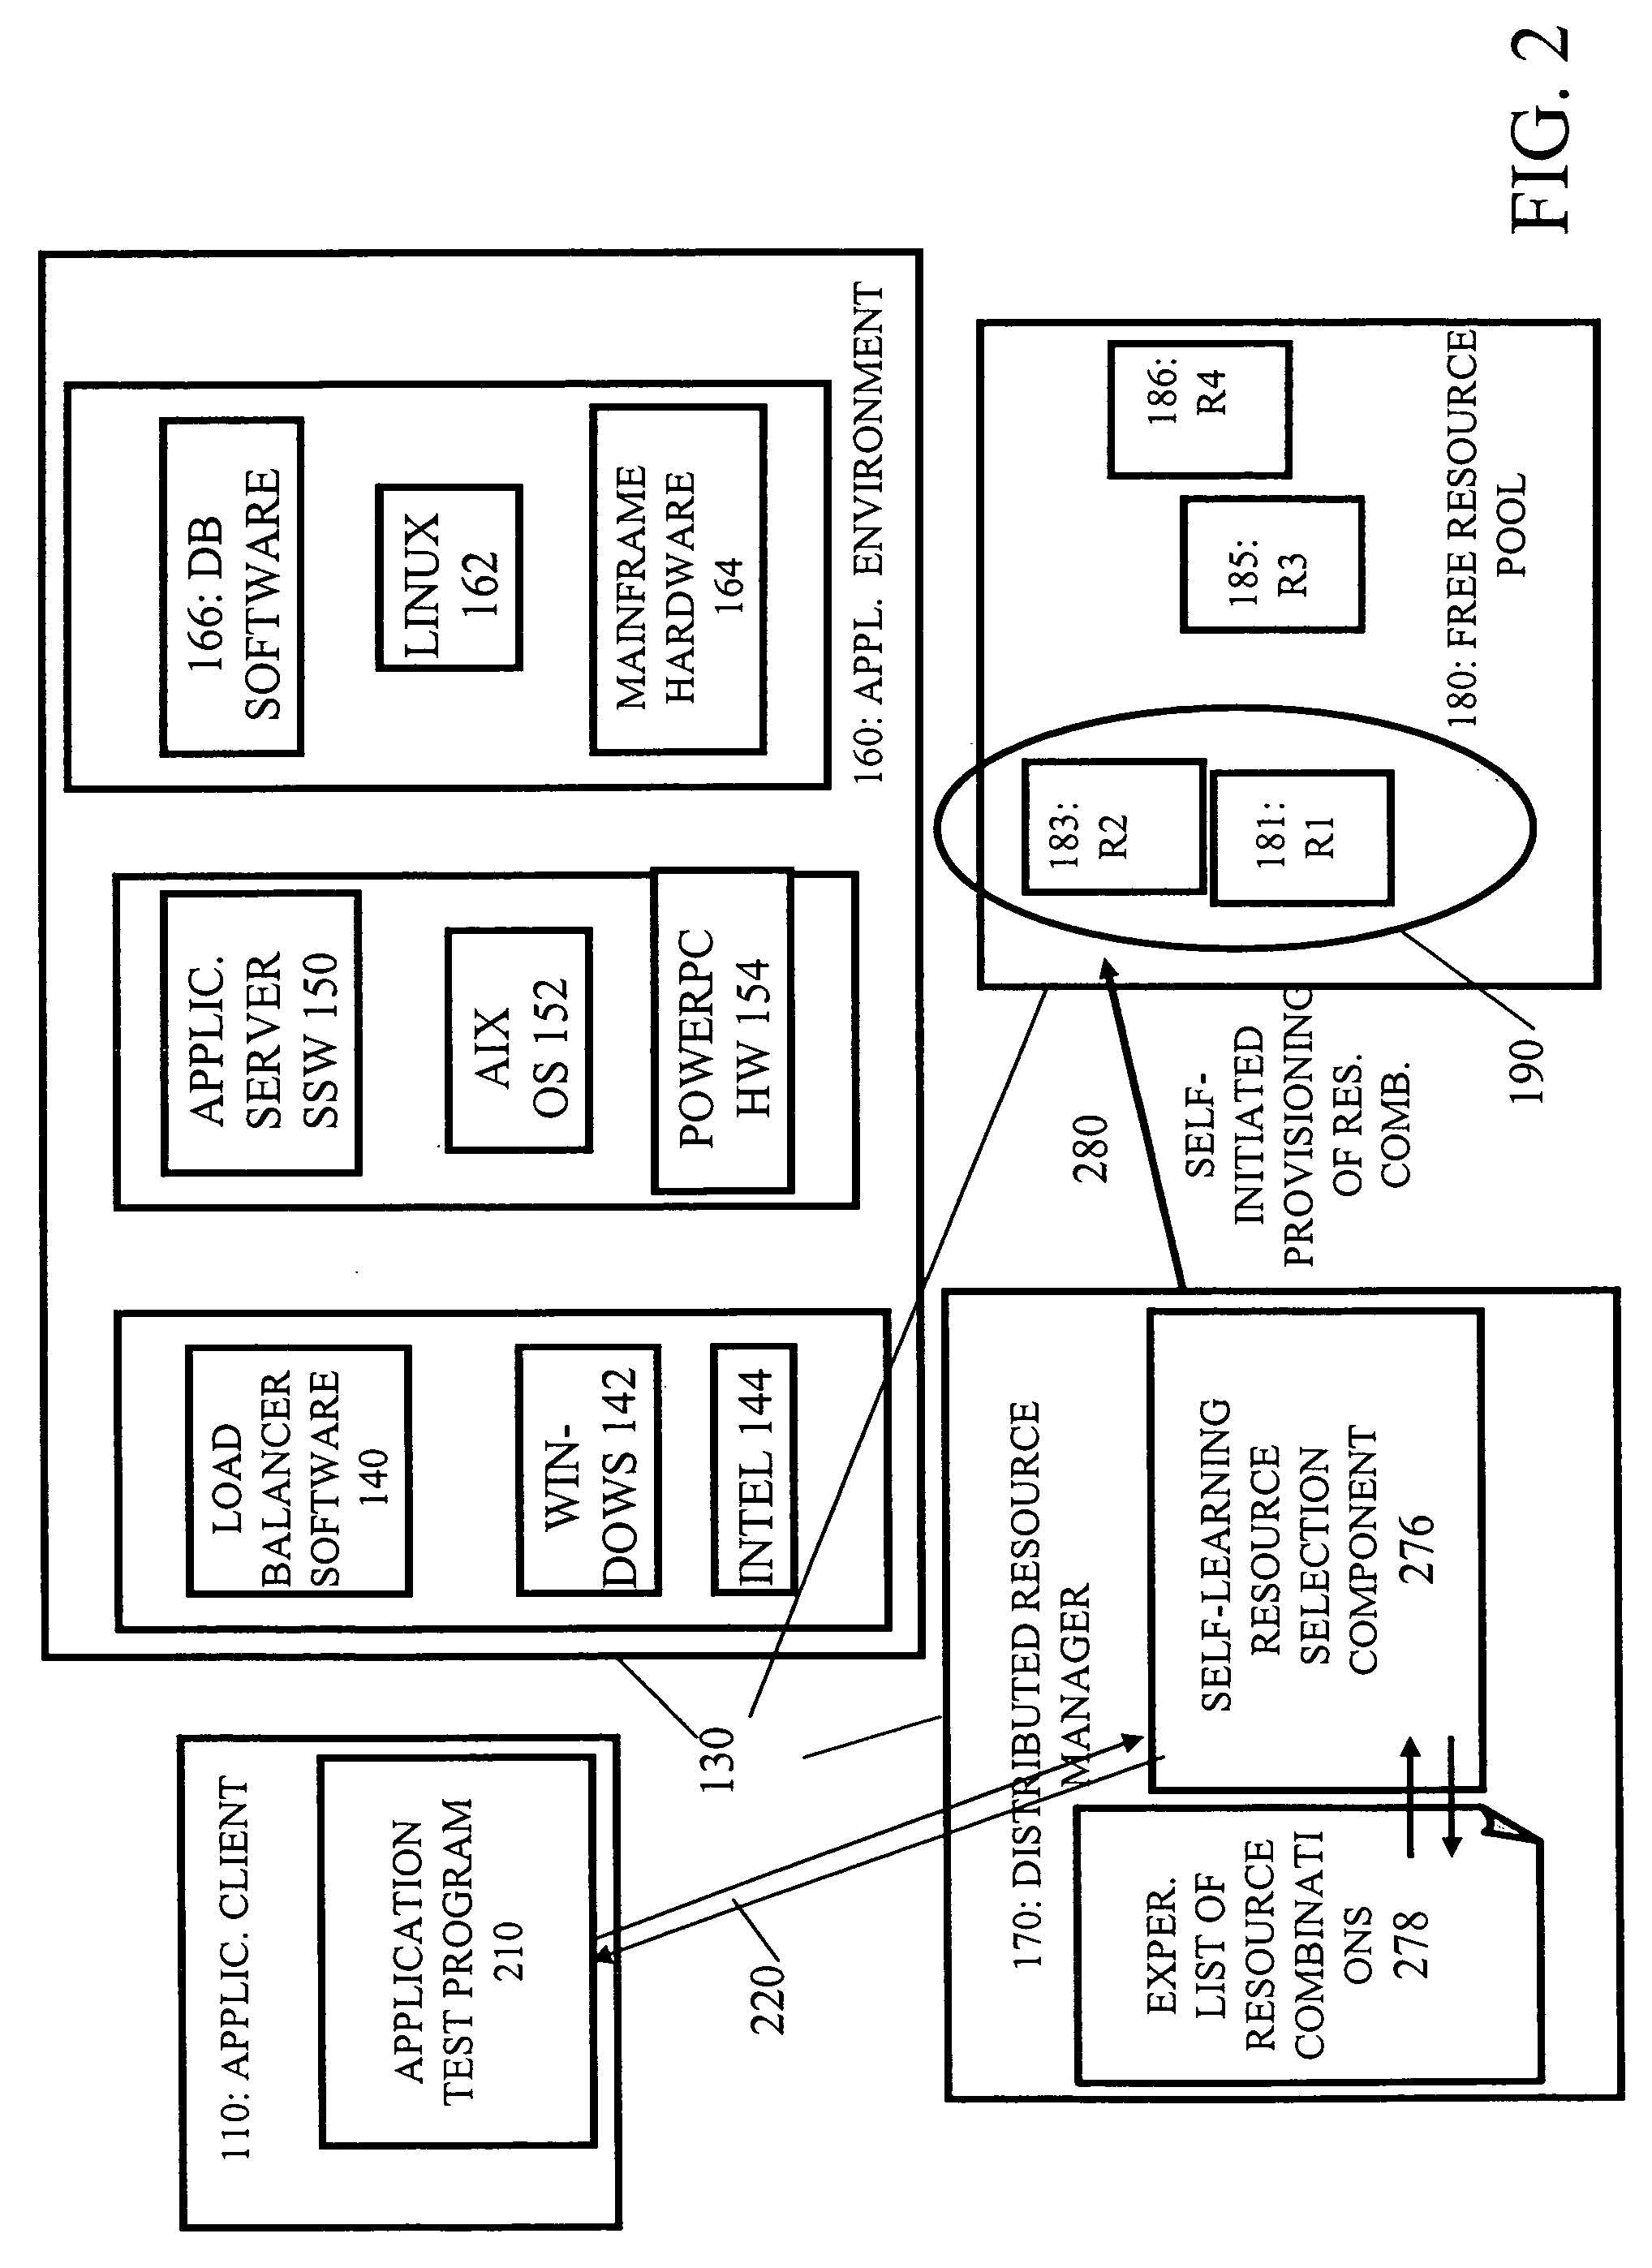 Method and system for autonomic self-learning in selecting resources for dynamic provisioning